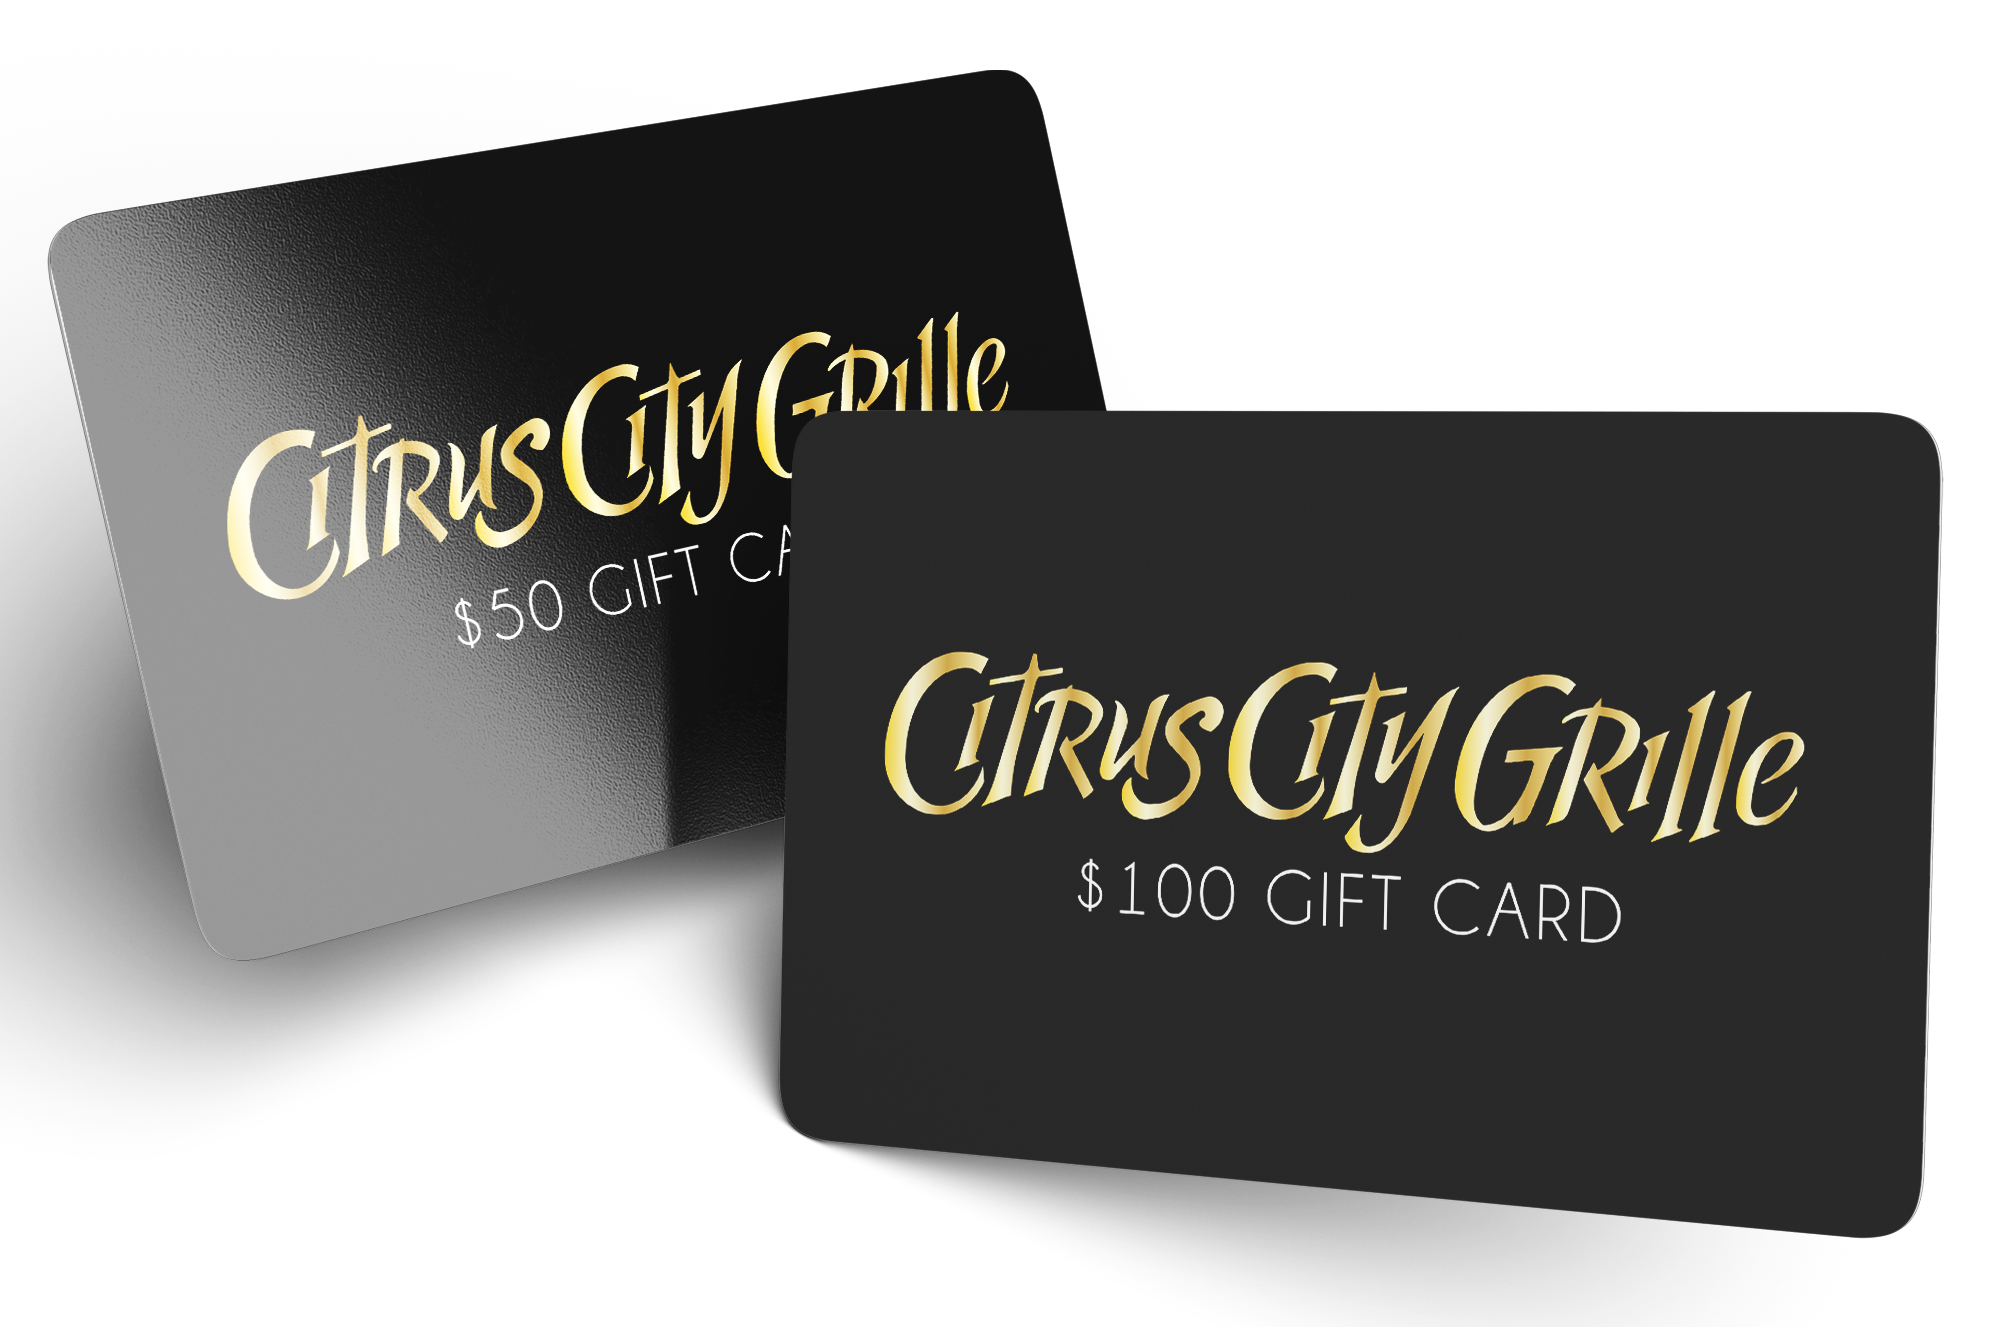 Citrus City Grille – Welcome!